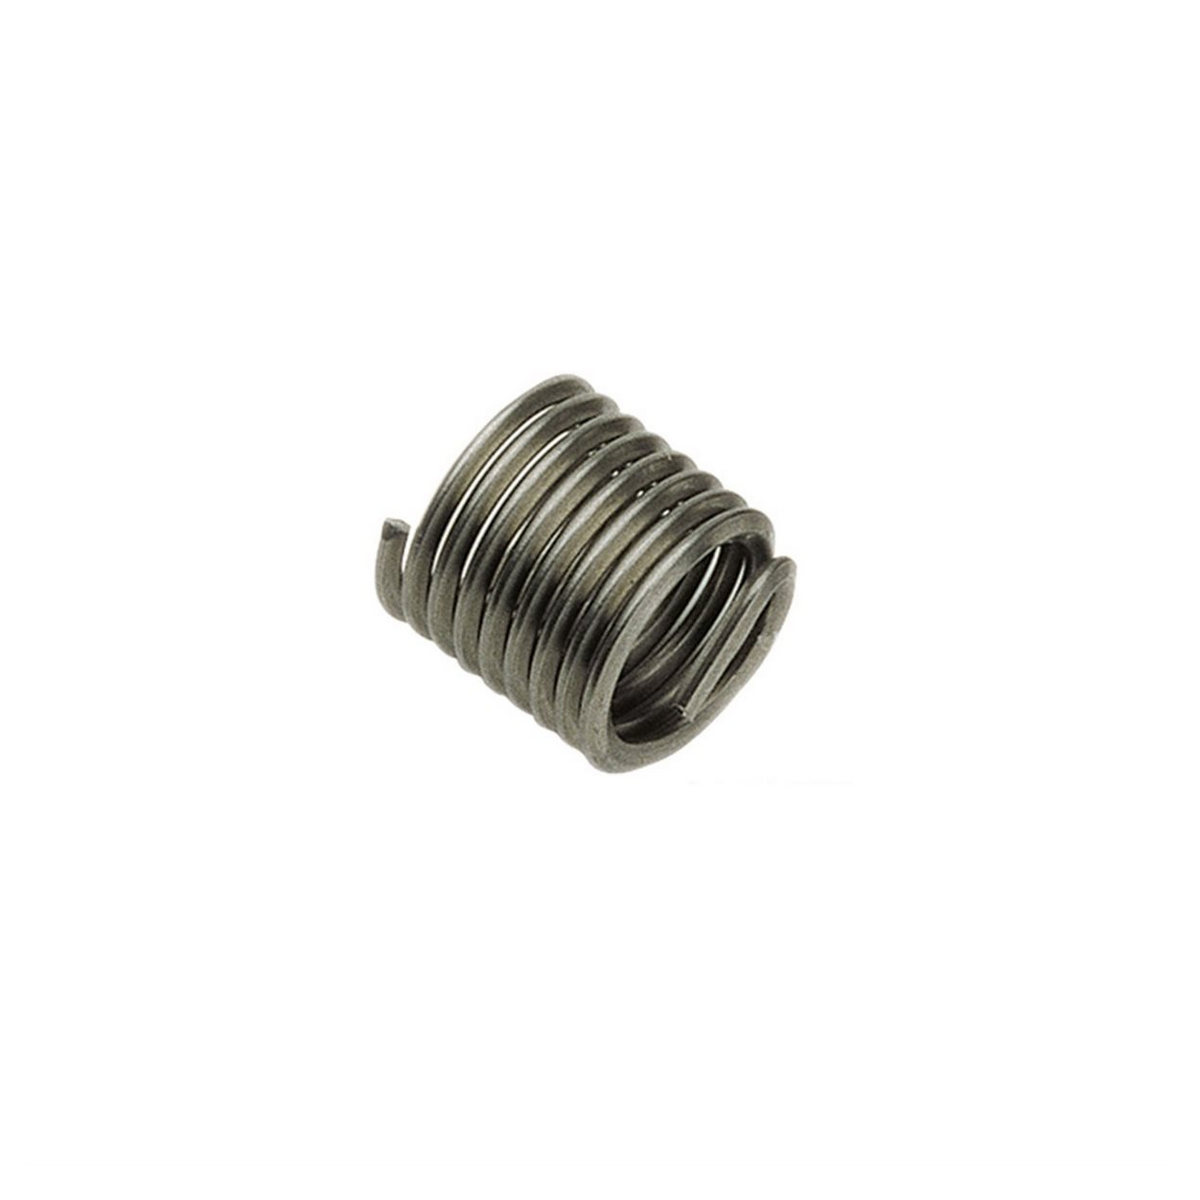 Helicoil thread insert M10x1.00 height 1,0D ISO 2 stainless steel DIN 8140